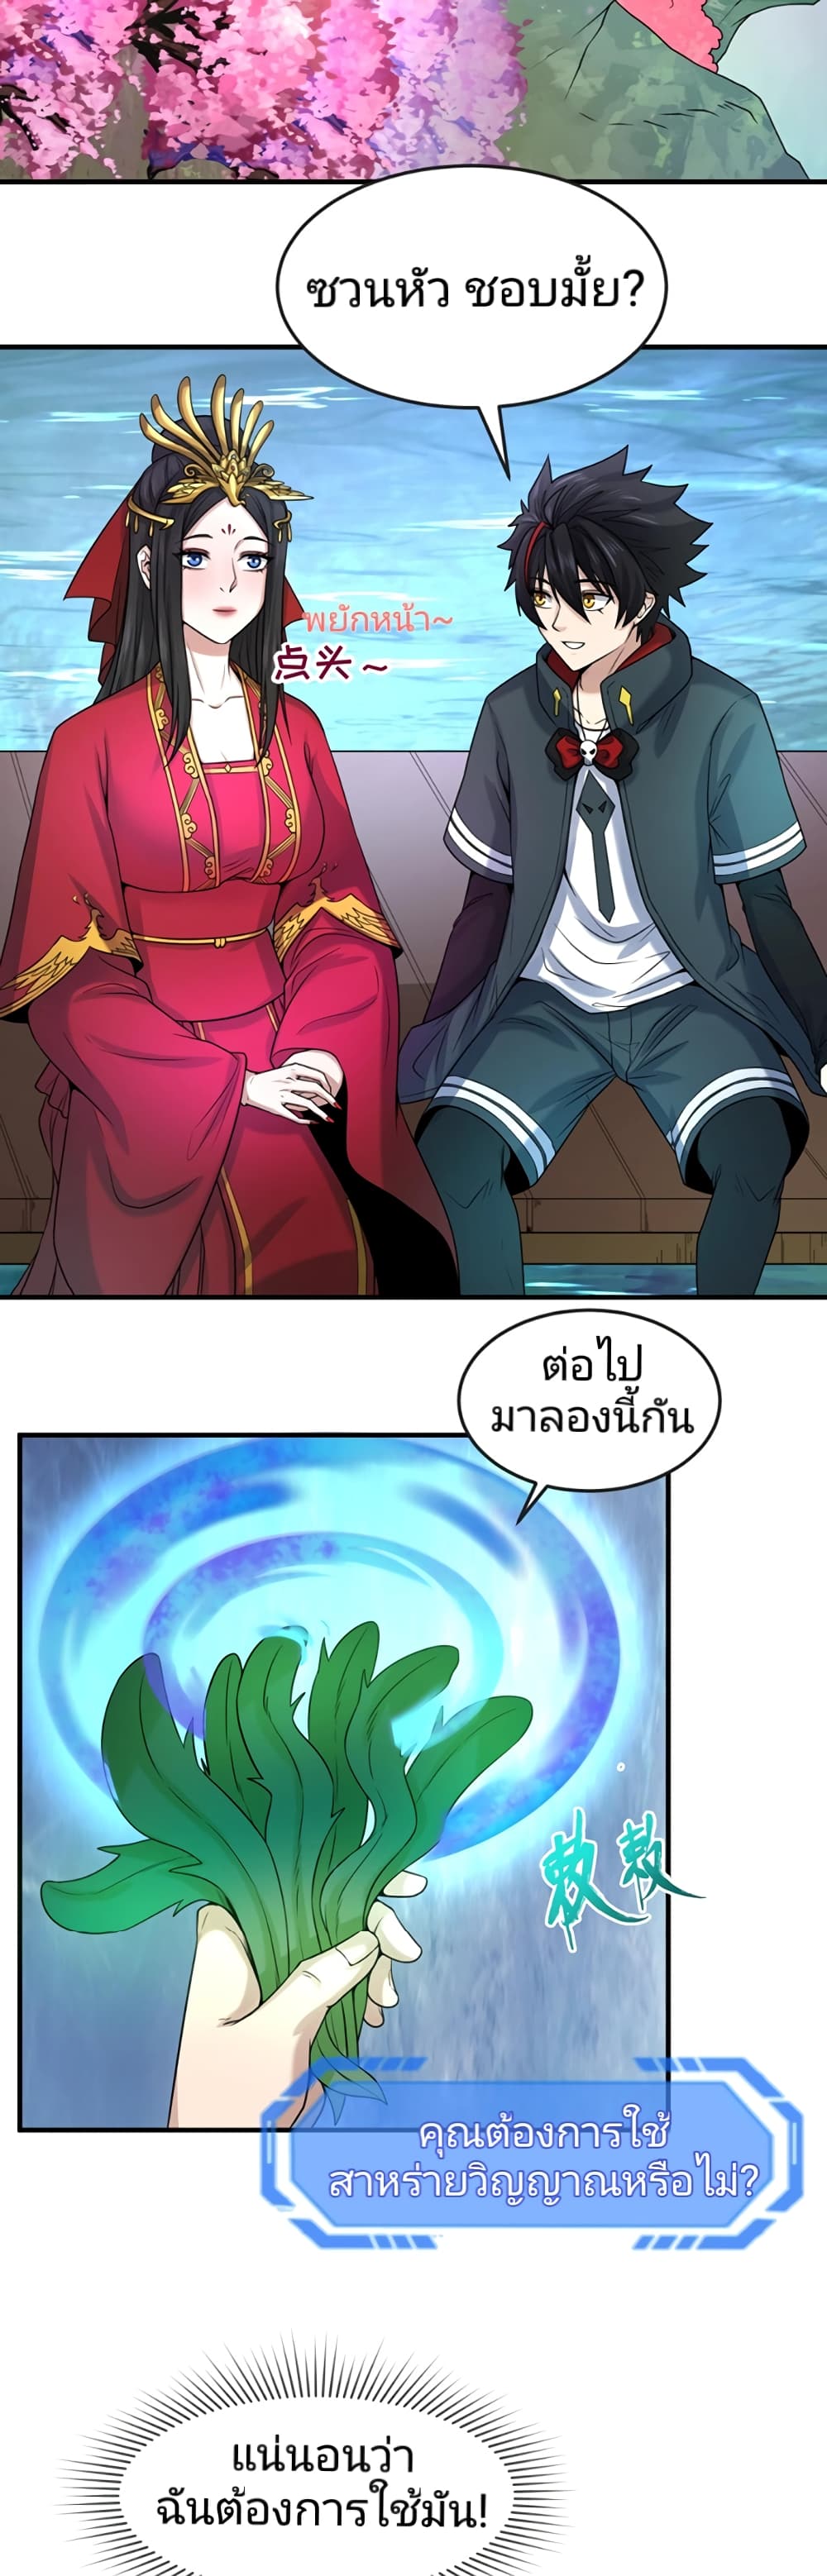 The Age of Ghost Spirits à¸à¸­à¸à¸à¸µà¹ 23 (35)